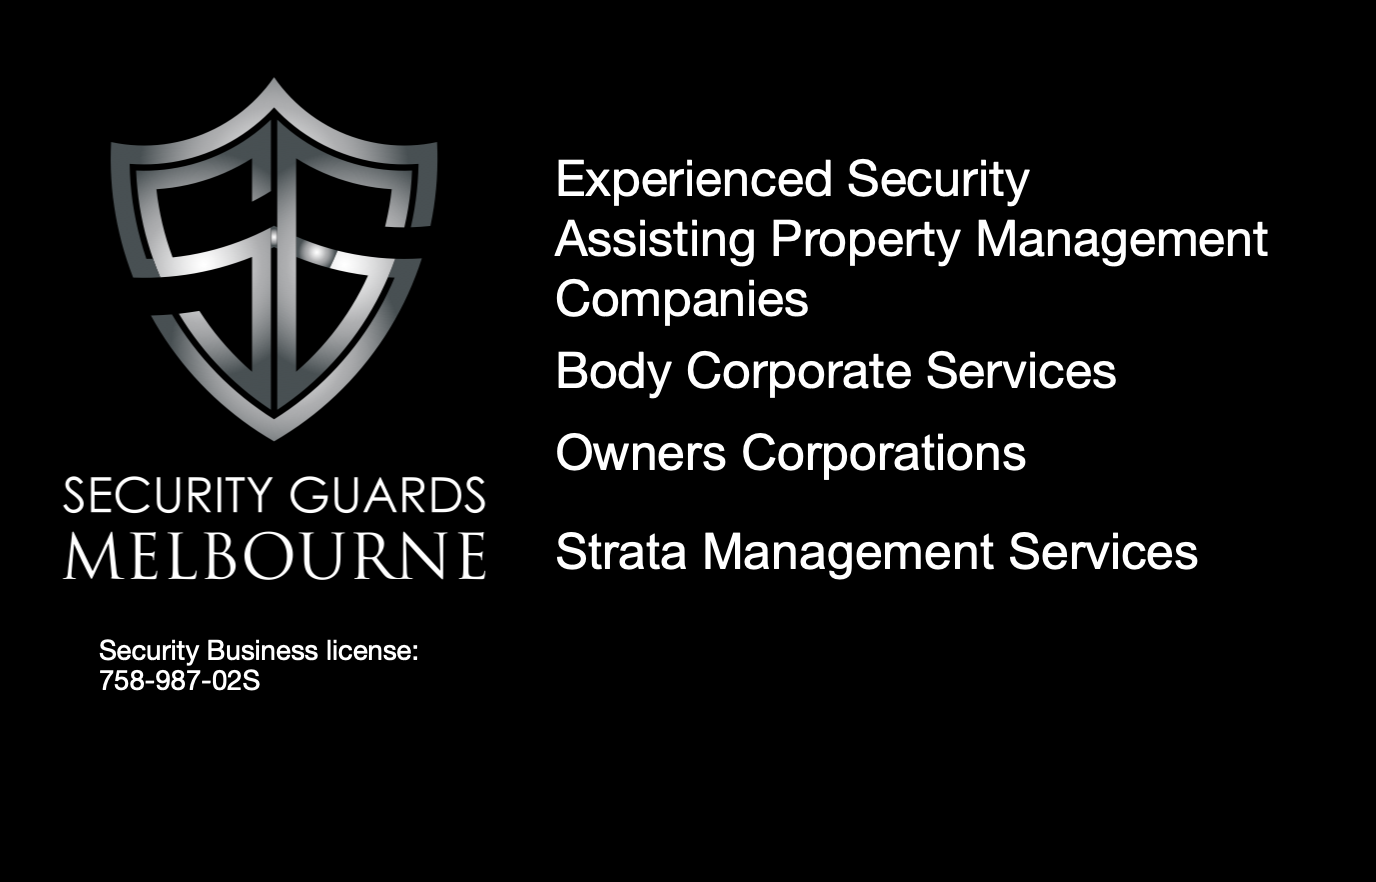 Assisting, Property Management Companies Body Corporate Services Owners Corporations Strata Management Services